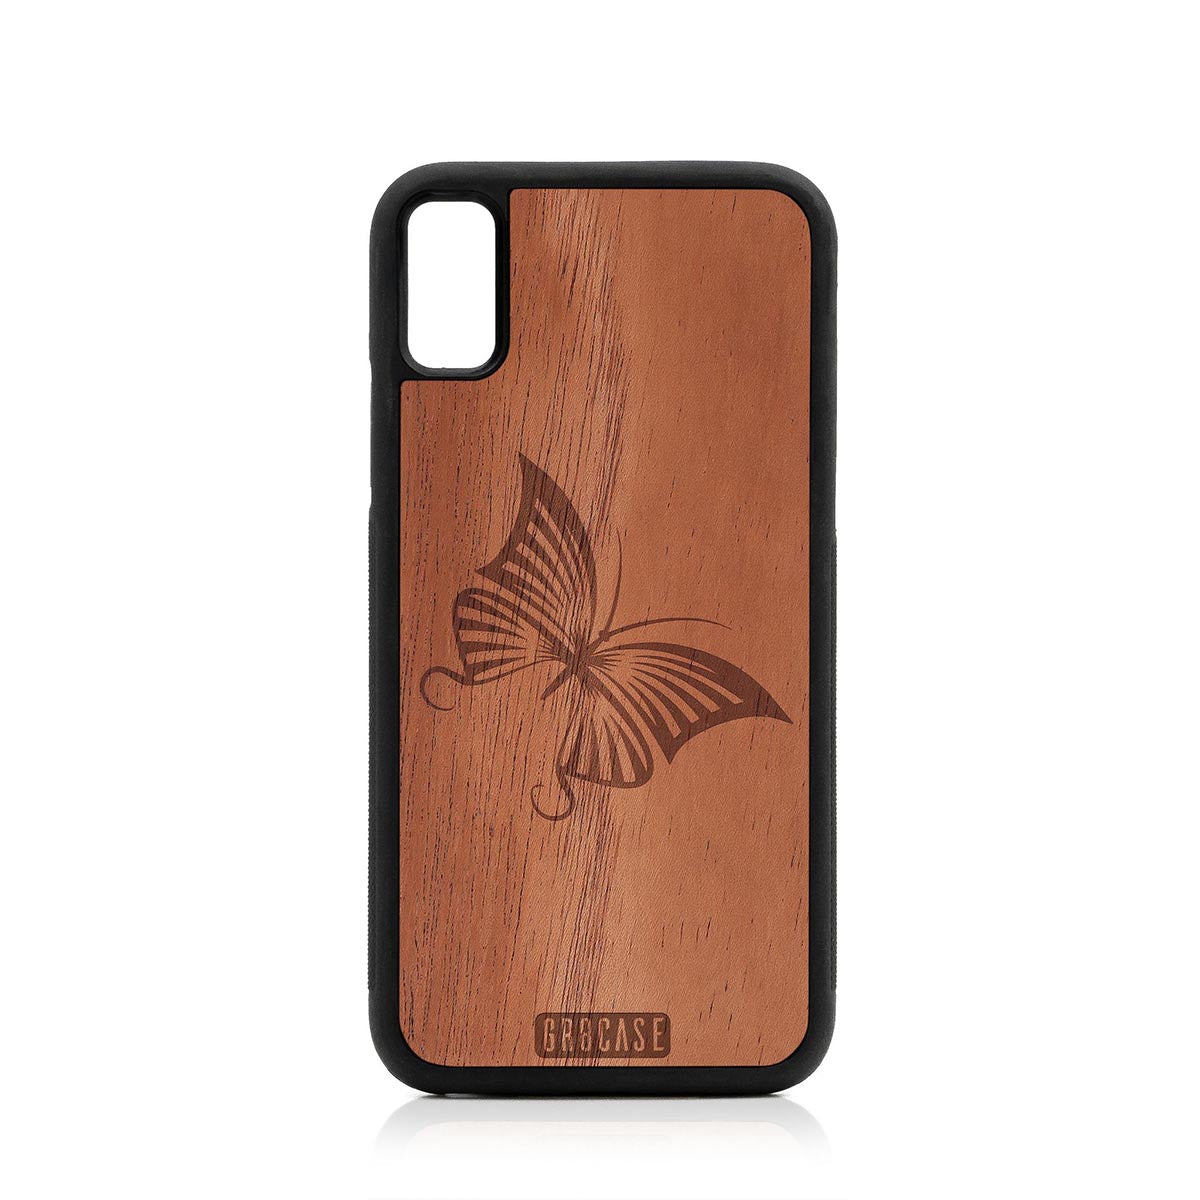 Butterfly Design Wood Case For iPhone XS Max by GR8CASE